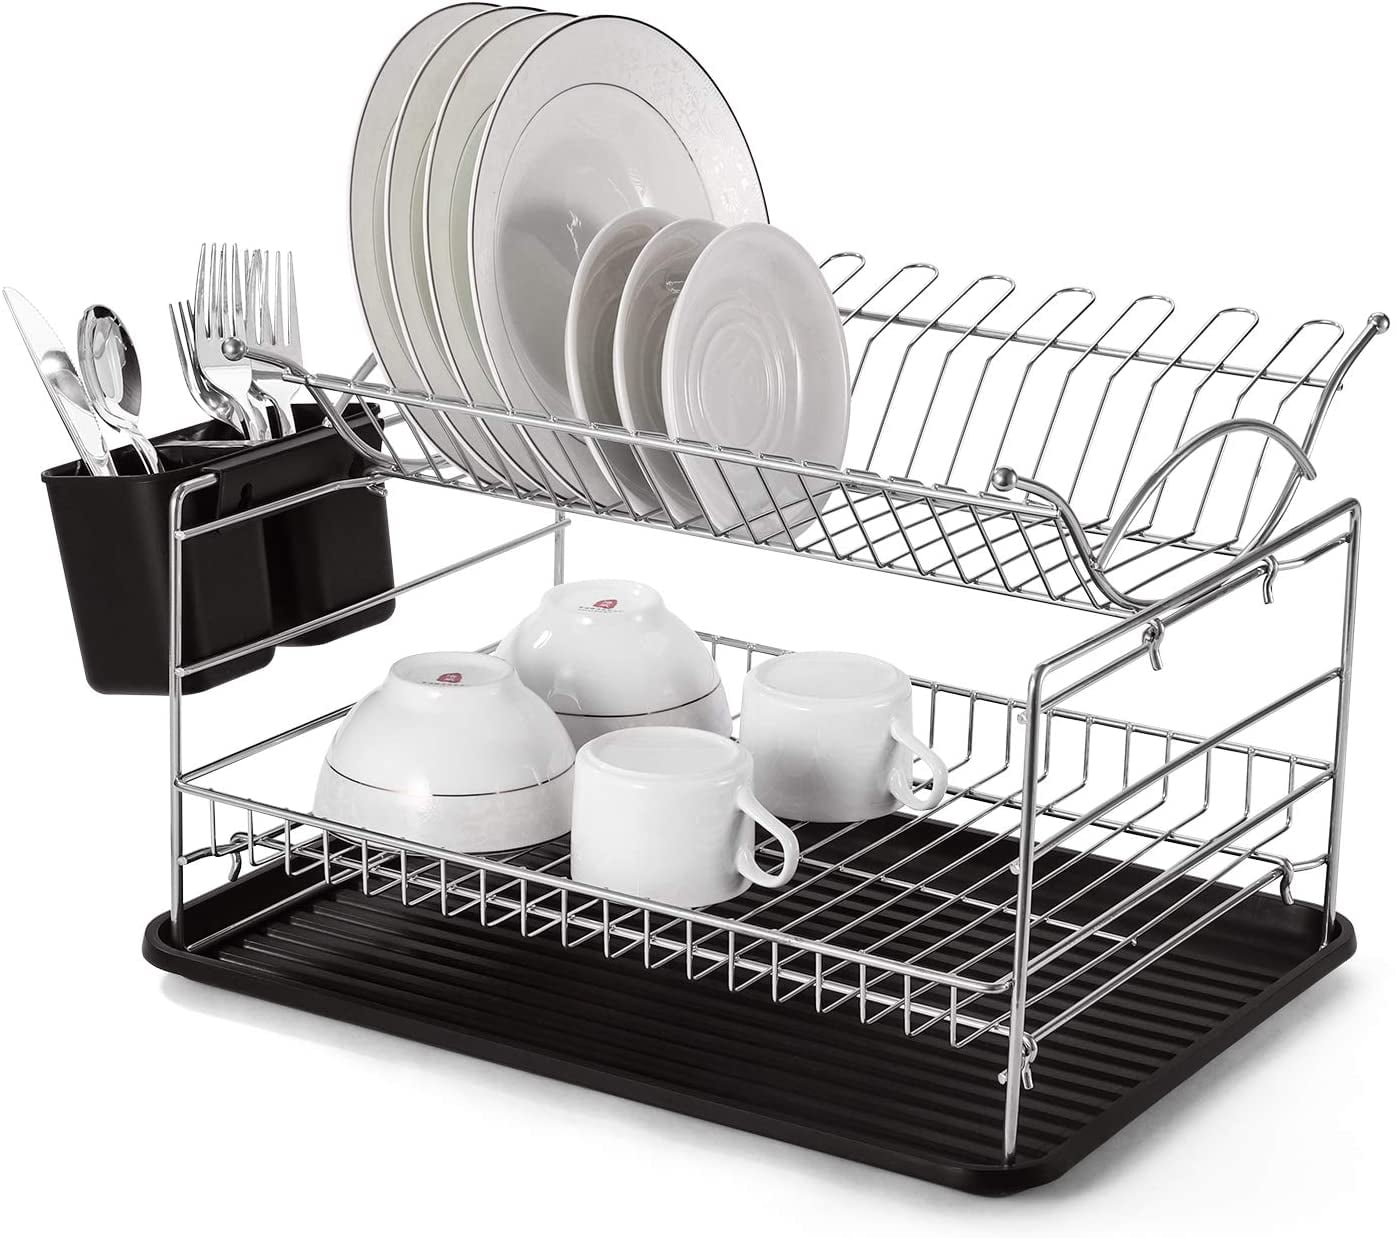 2 Tiers Dish Drying Rack Drainer Dryer Tray Kitchen Plate Cup Storage US SELLER 